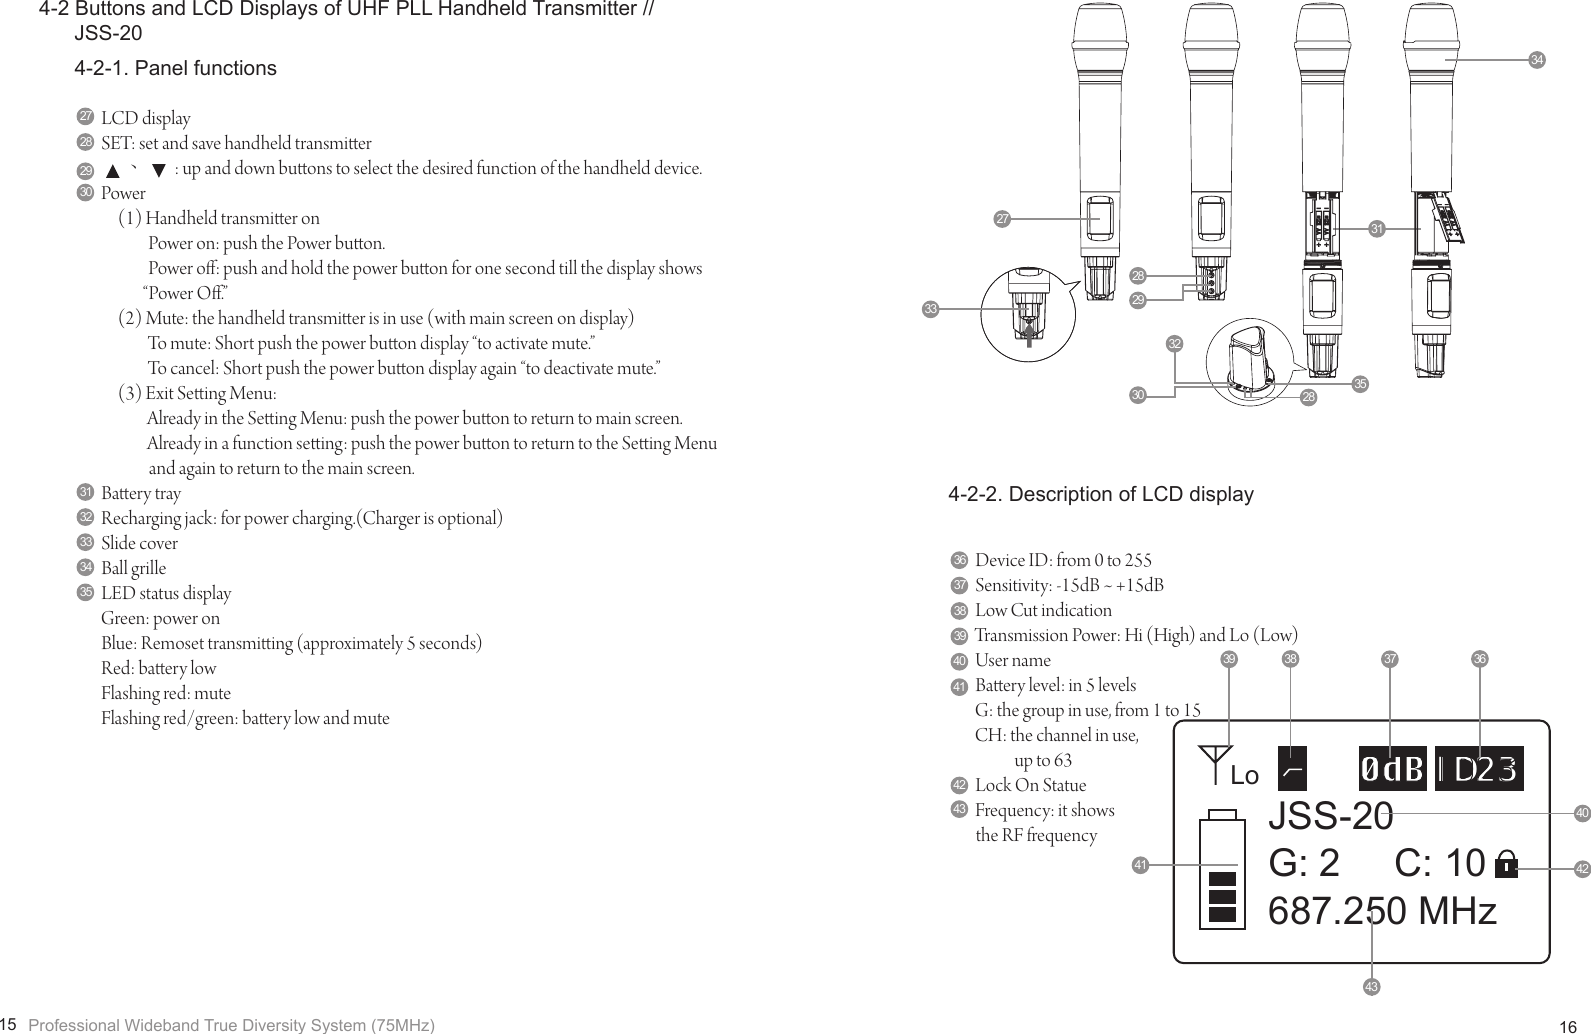 Page 11 of JTS Professional Co JSS-20 UHF PLL Handheld Transmitter User Manual 